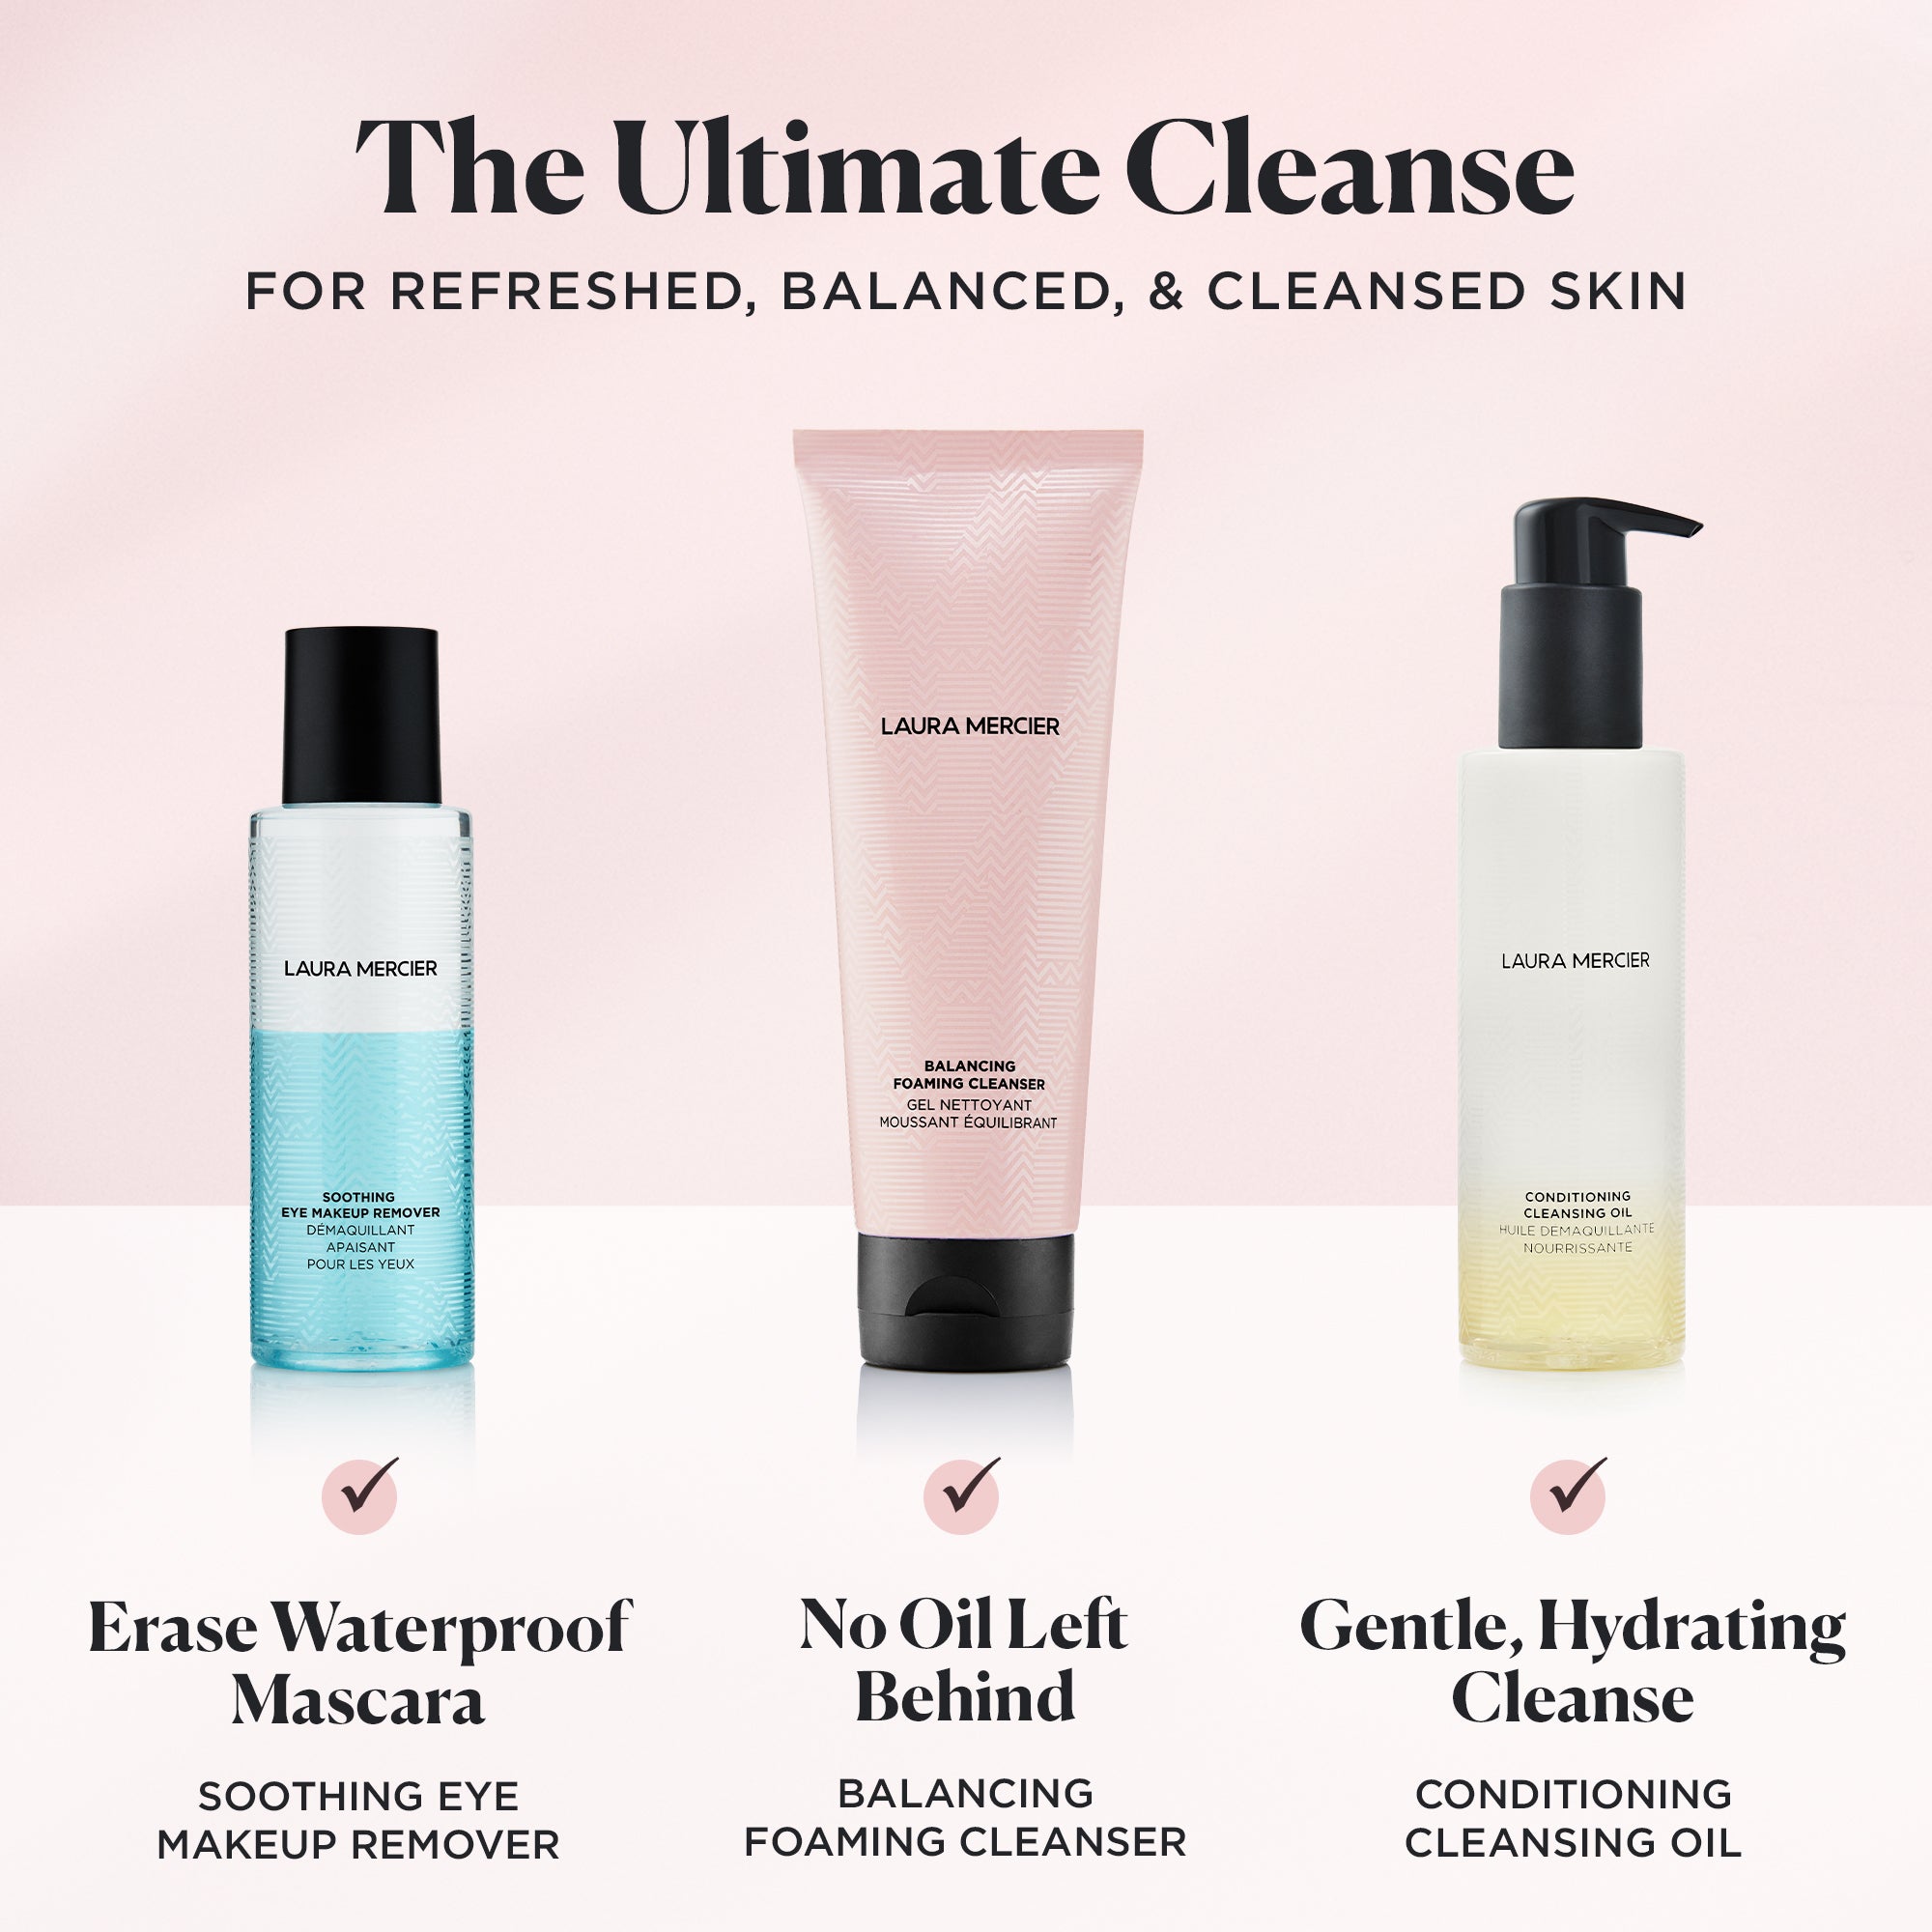 Balancing Foaming Cleanser View 2